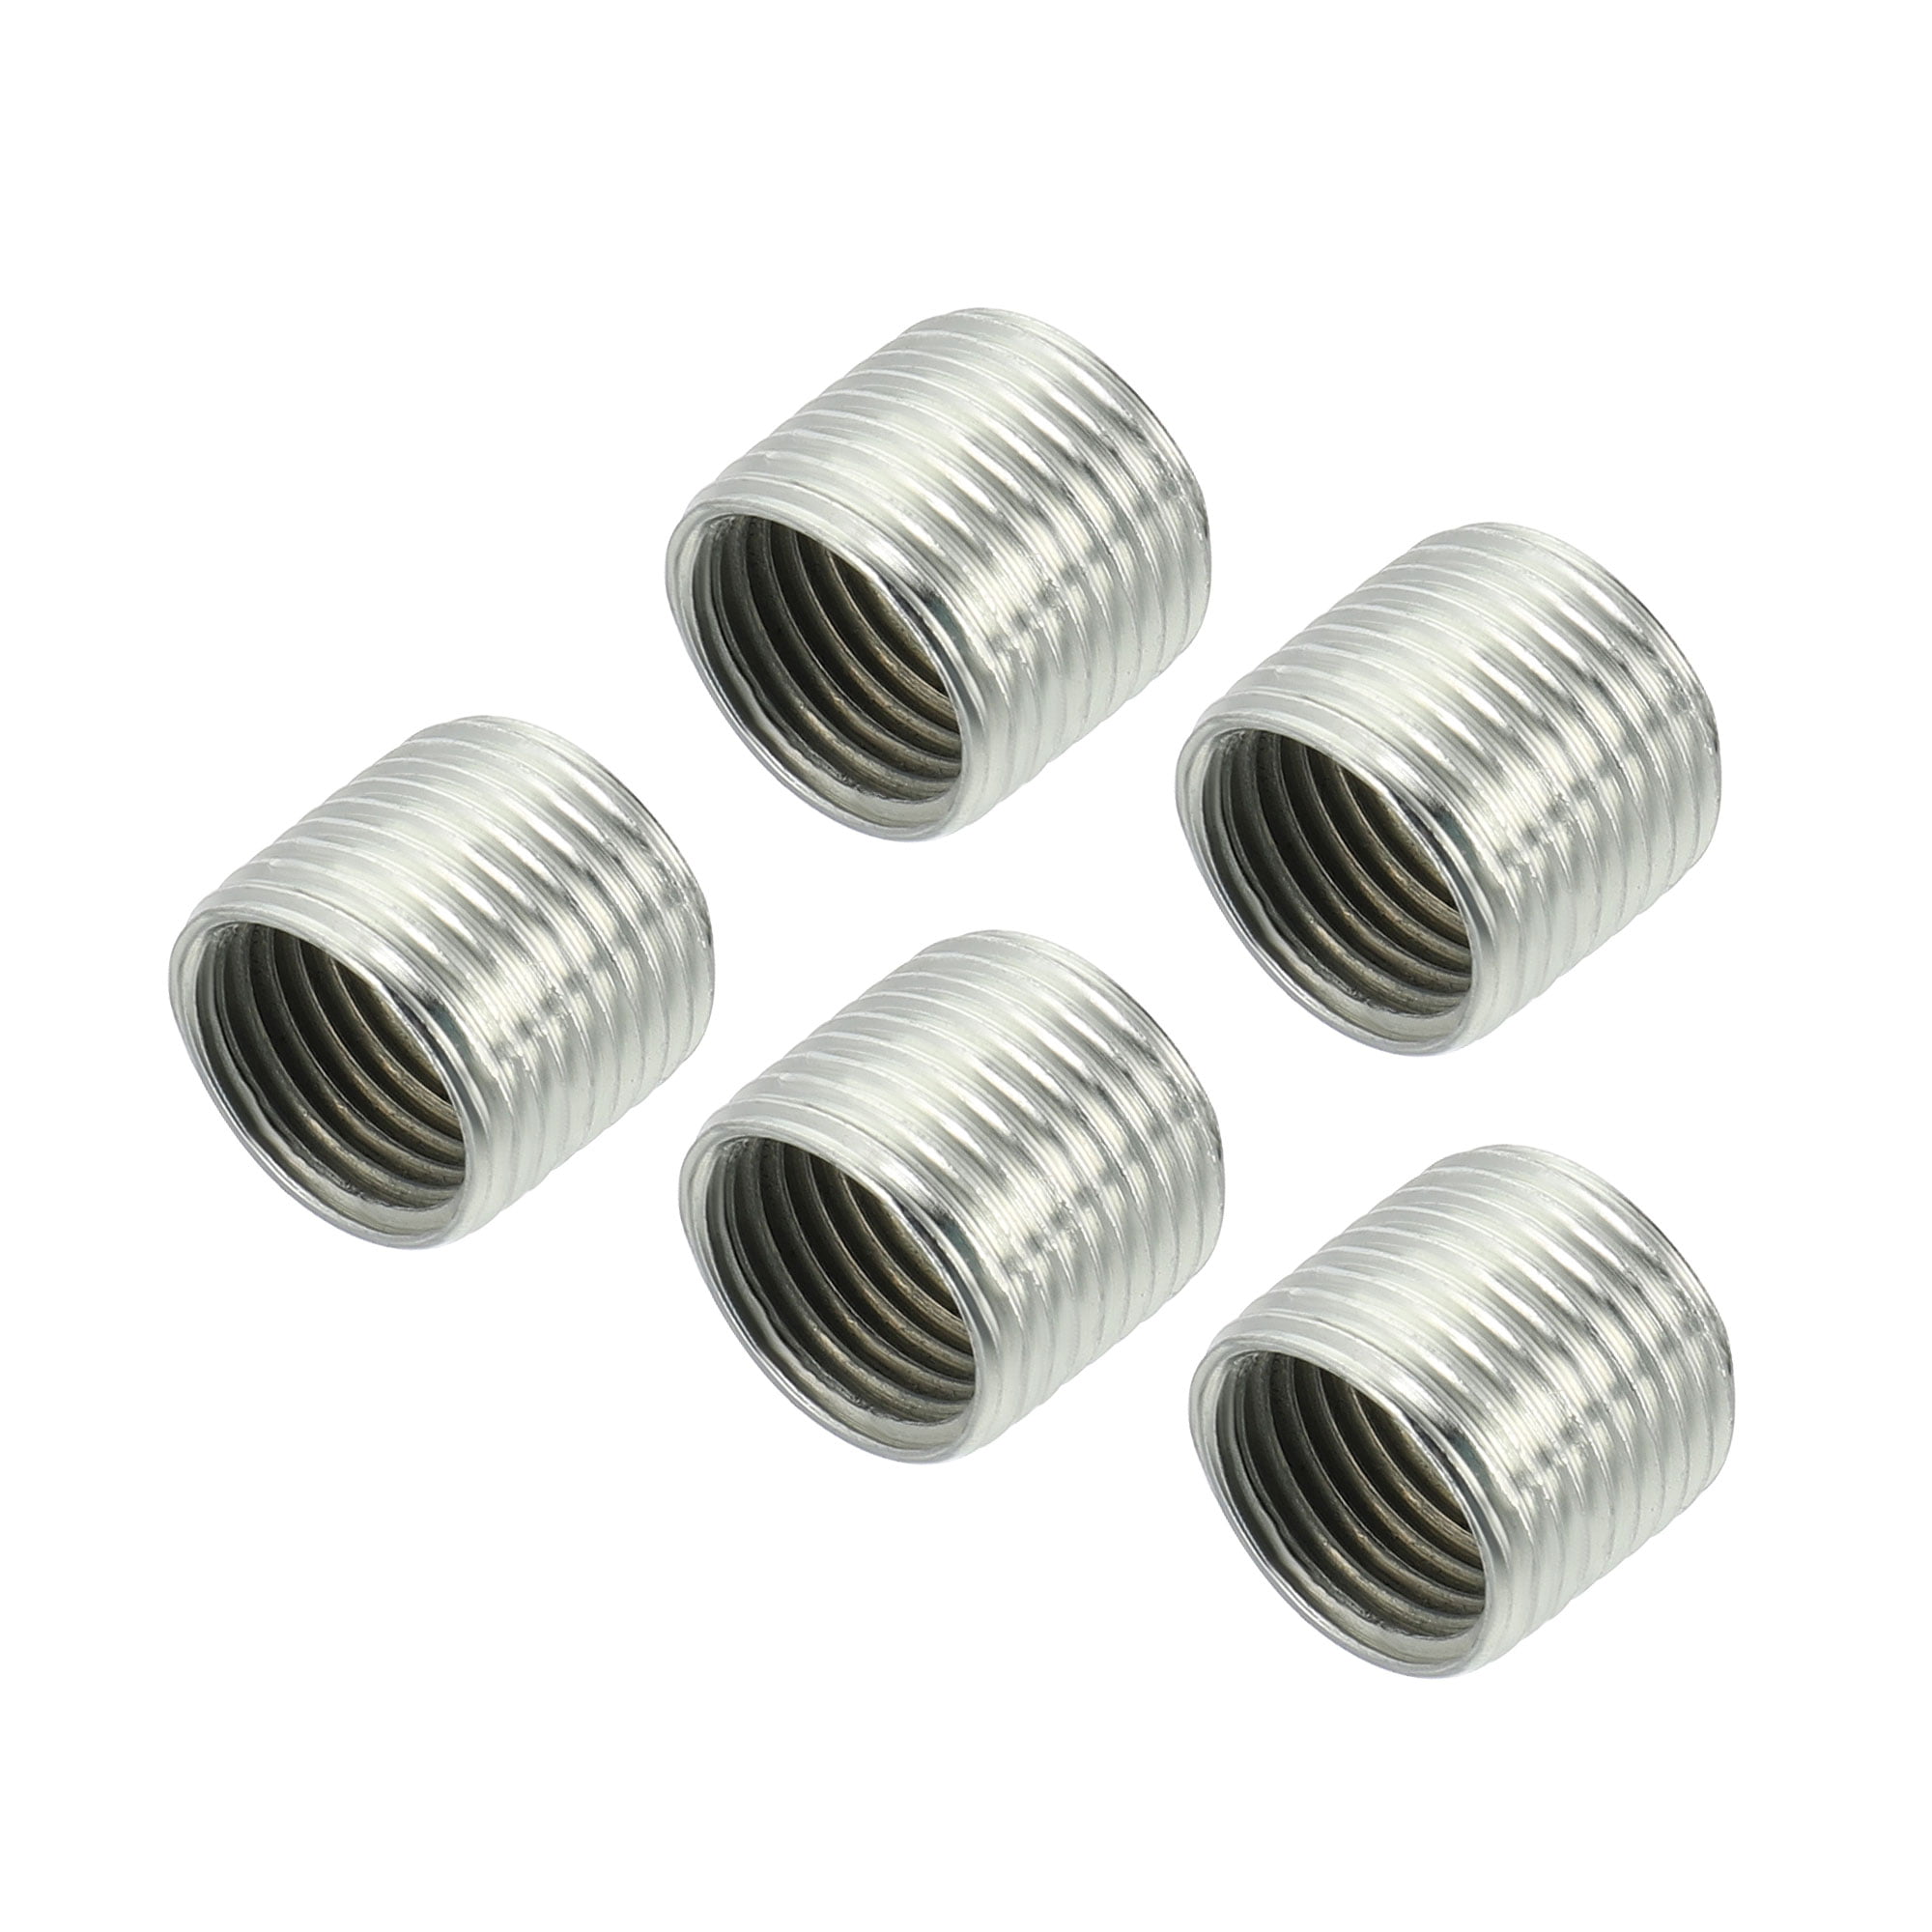 M10 10mm Male to M8 8mm Female Reducers Threaded A2L3 5 X Thread Adapters 